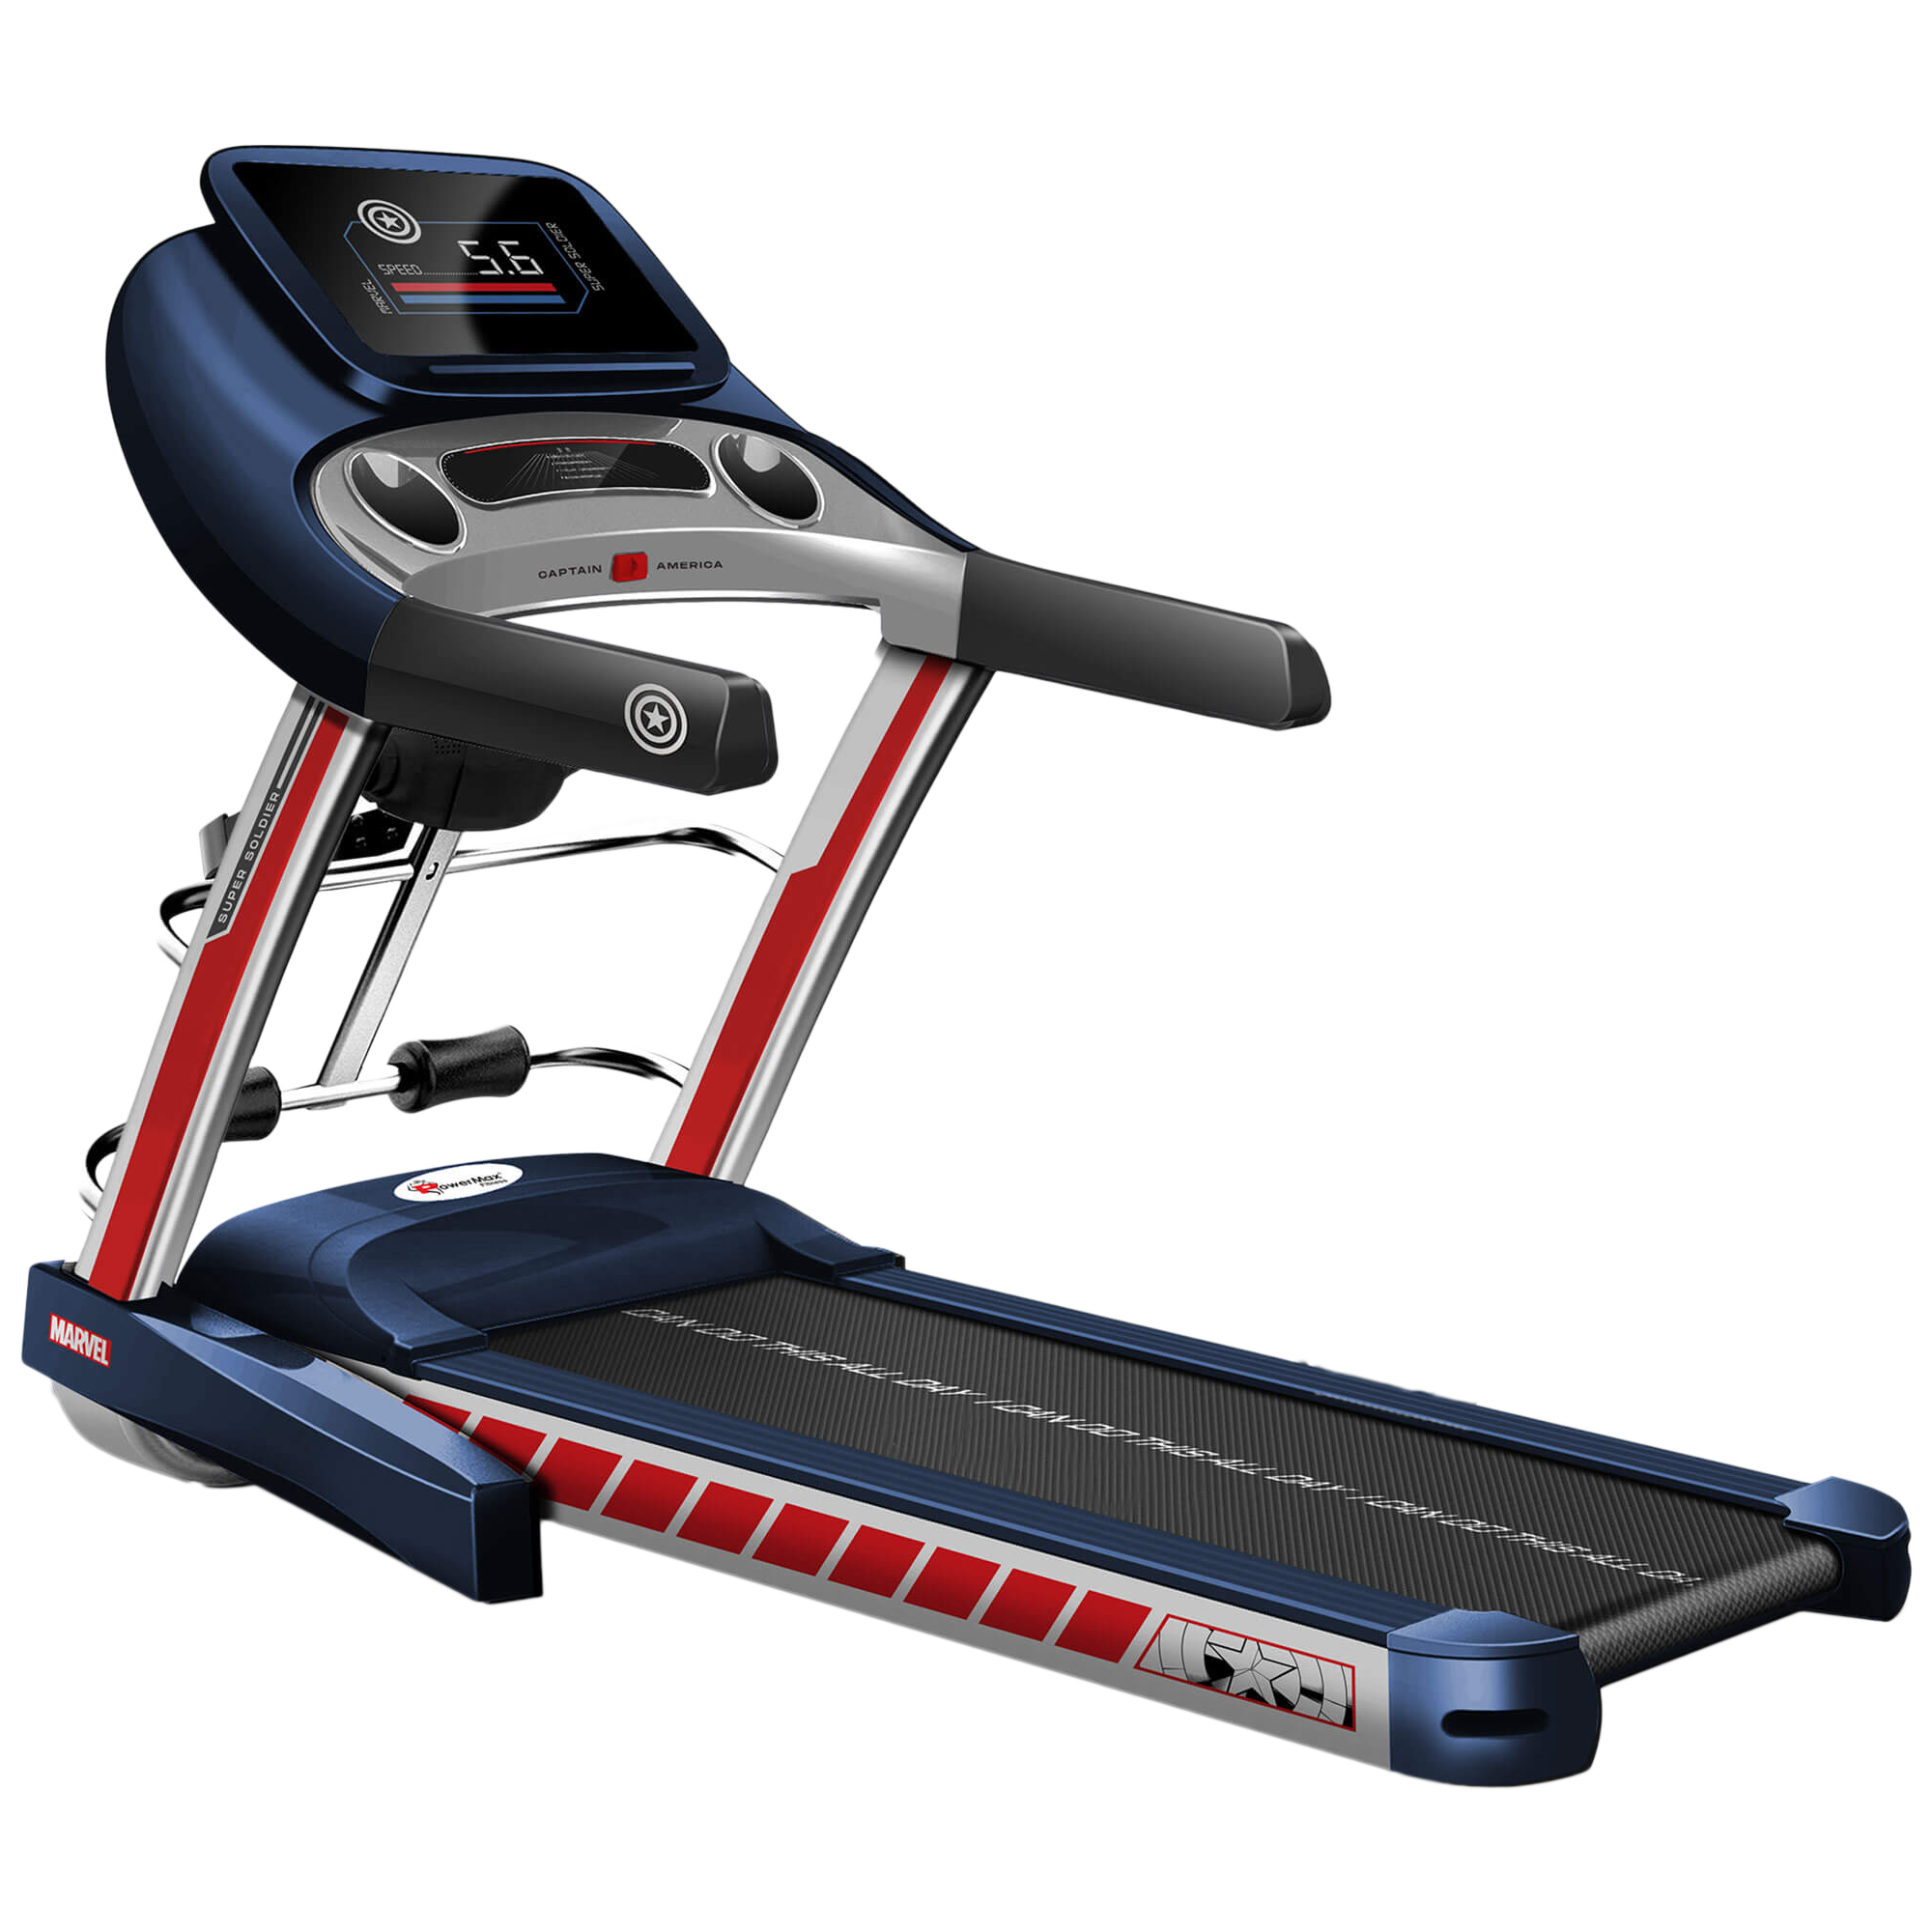 PowerMax 4HP Foldable Motorized Treadmill (Diamond Wave Running Belt with 15 Level Auto Inclination, MT-1A, Blue)